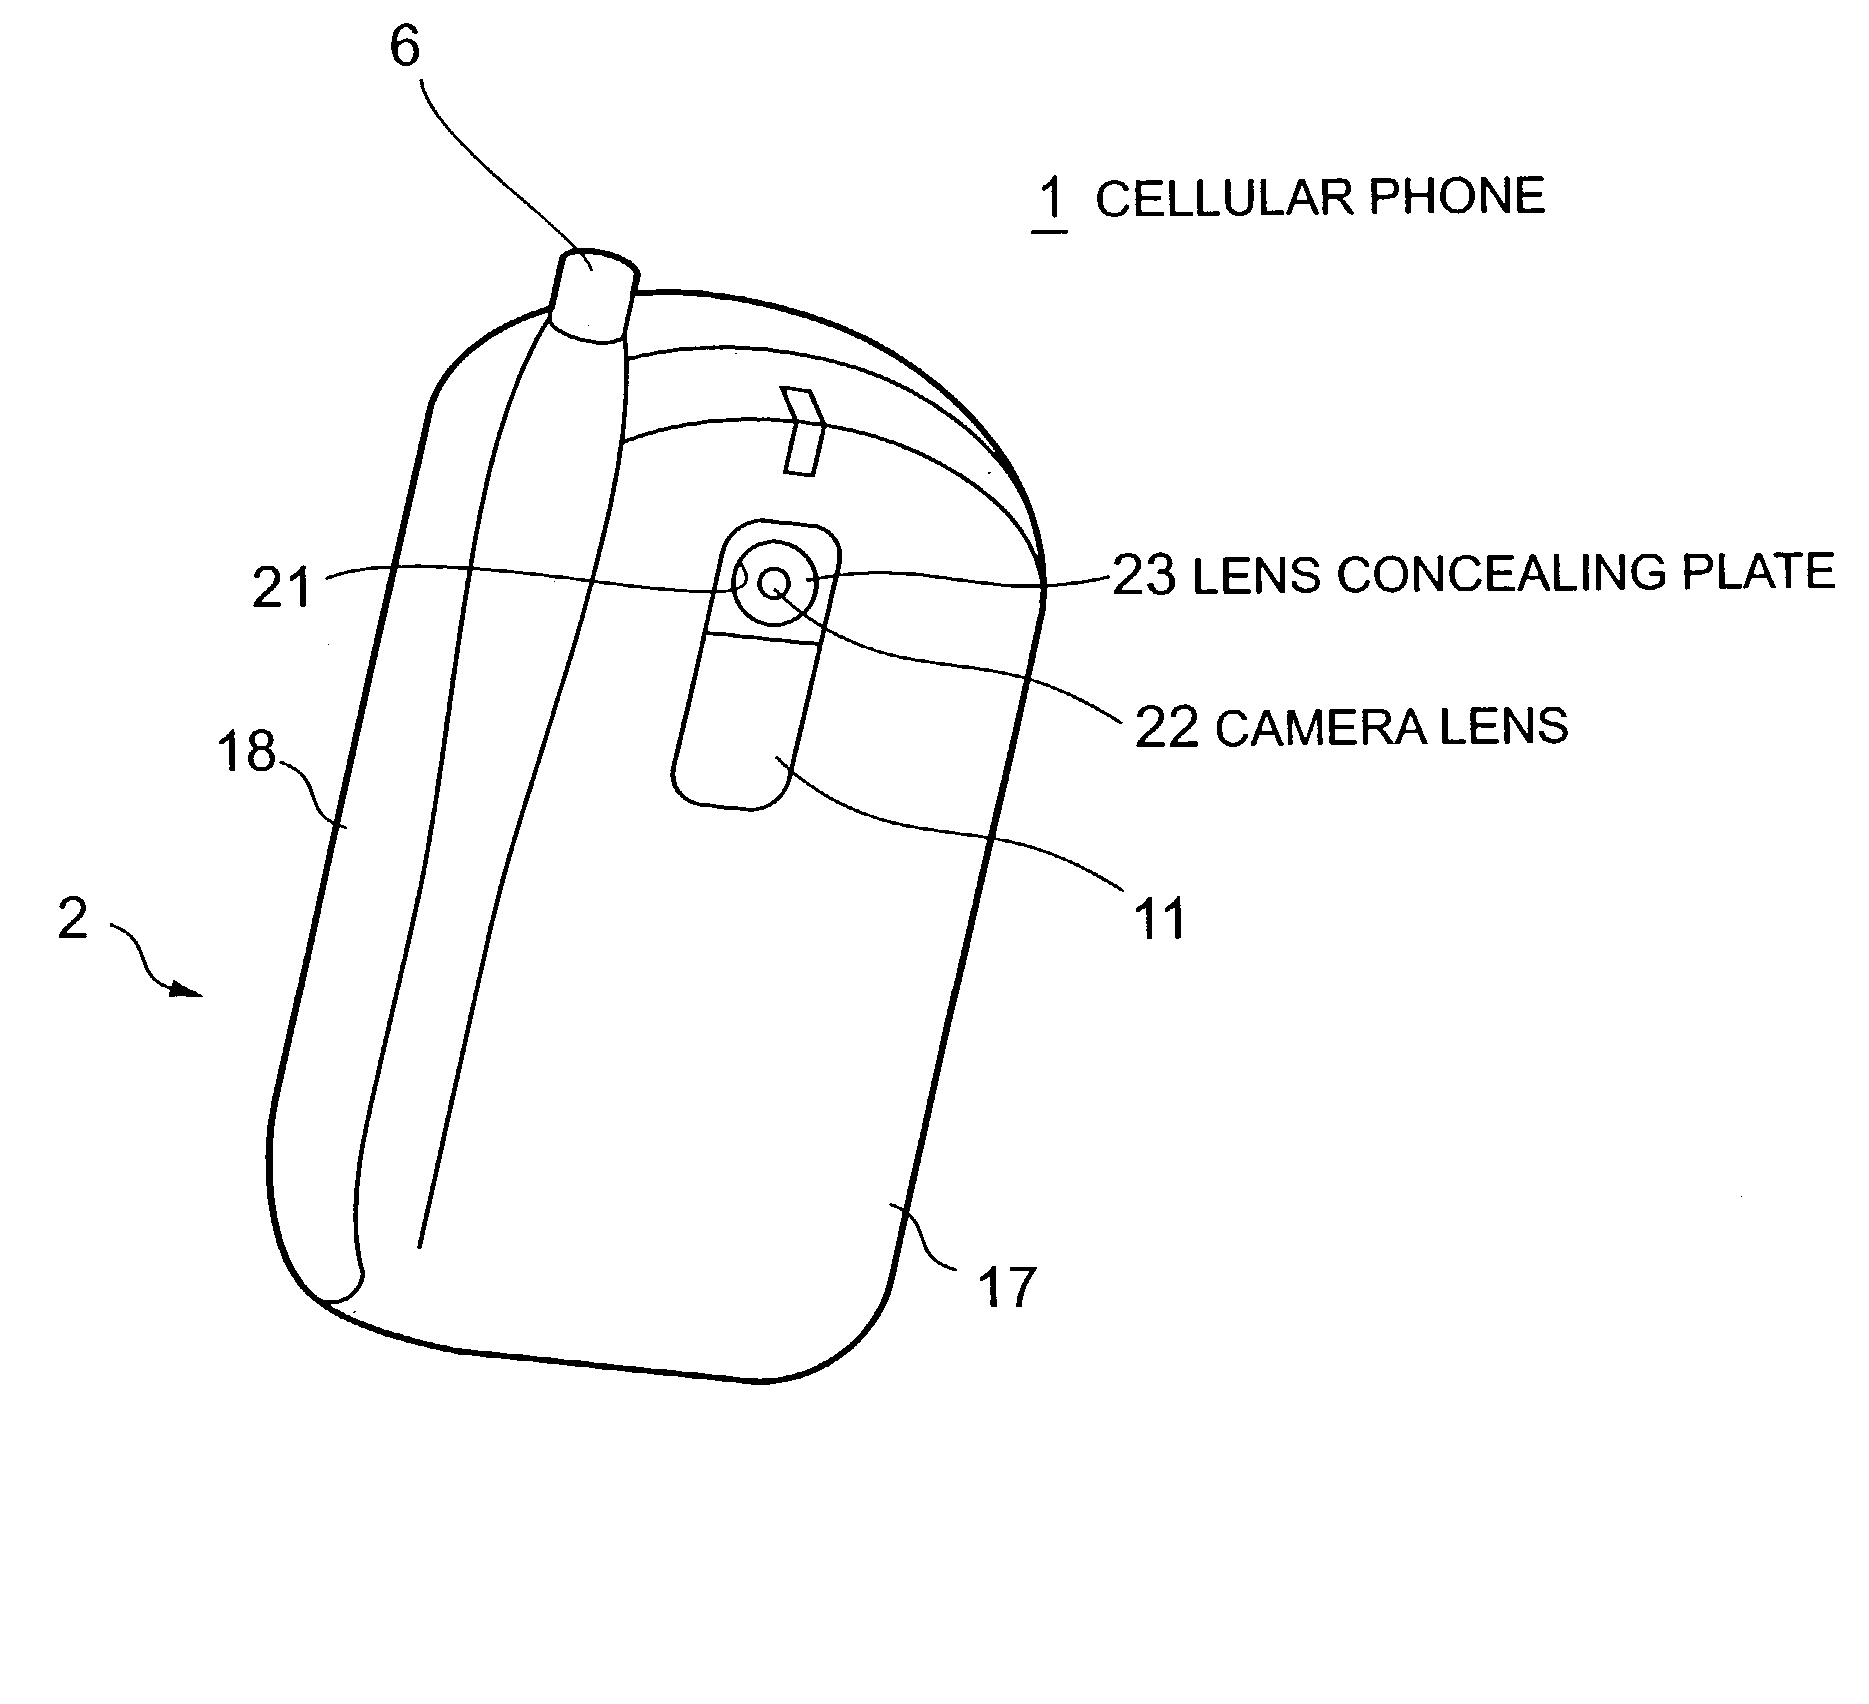 Portable electronic equipment having a photographing function